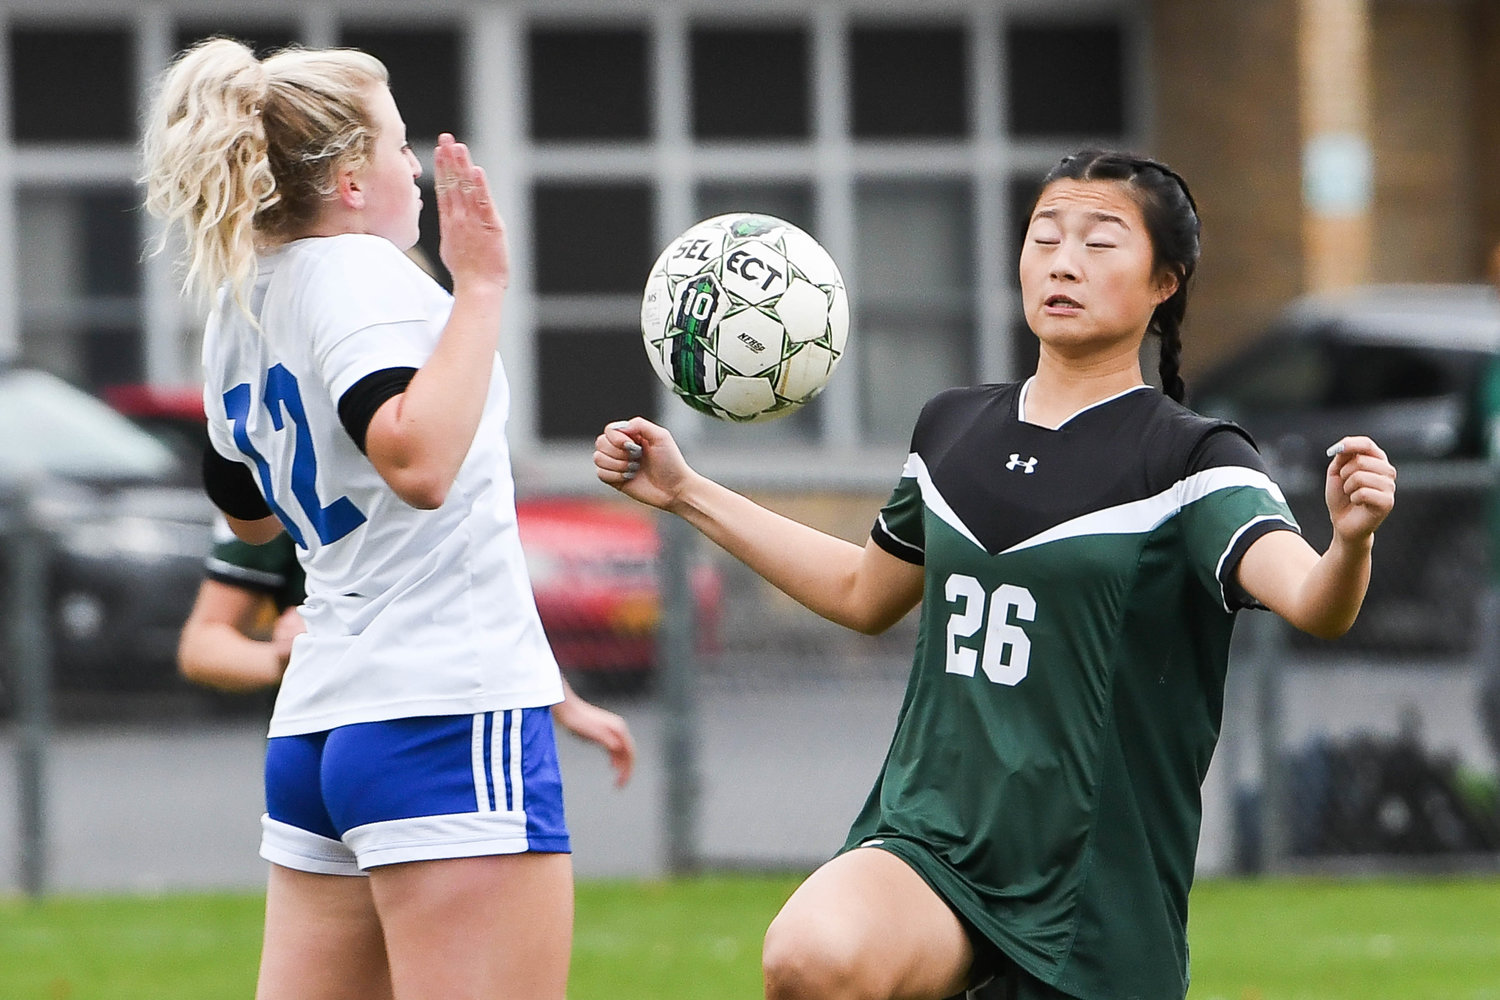 Dolgeville's Gianna Lyon, left, and Westmoreland's Emma Carmody attempt to settle the ball during the Class C playoff game on Tuesday. Dolgeville won 1-0.